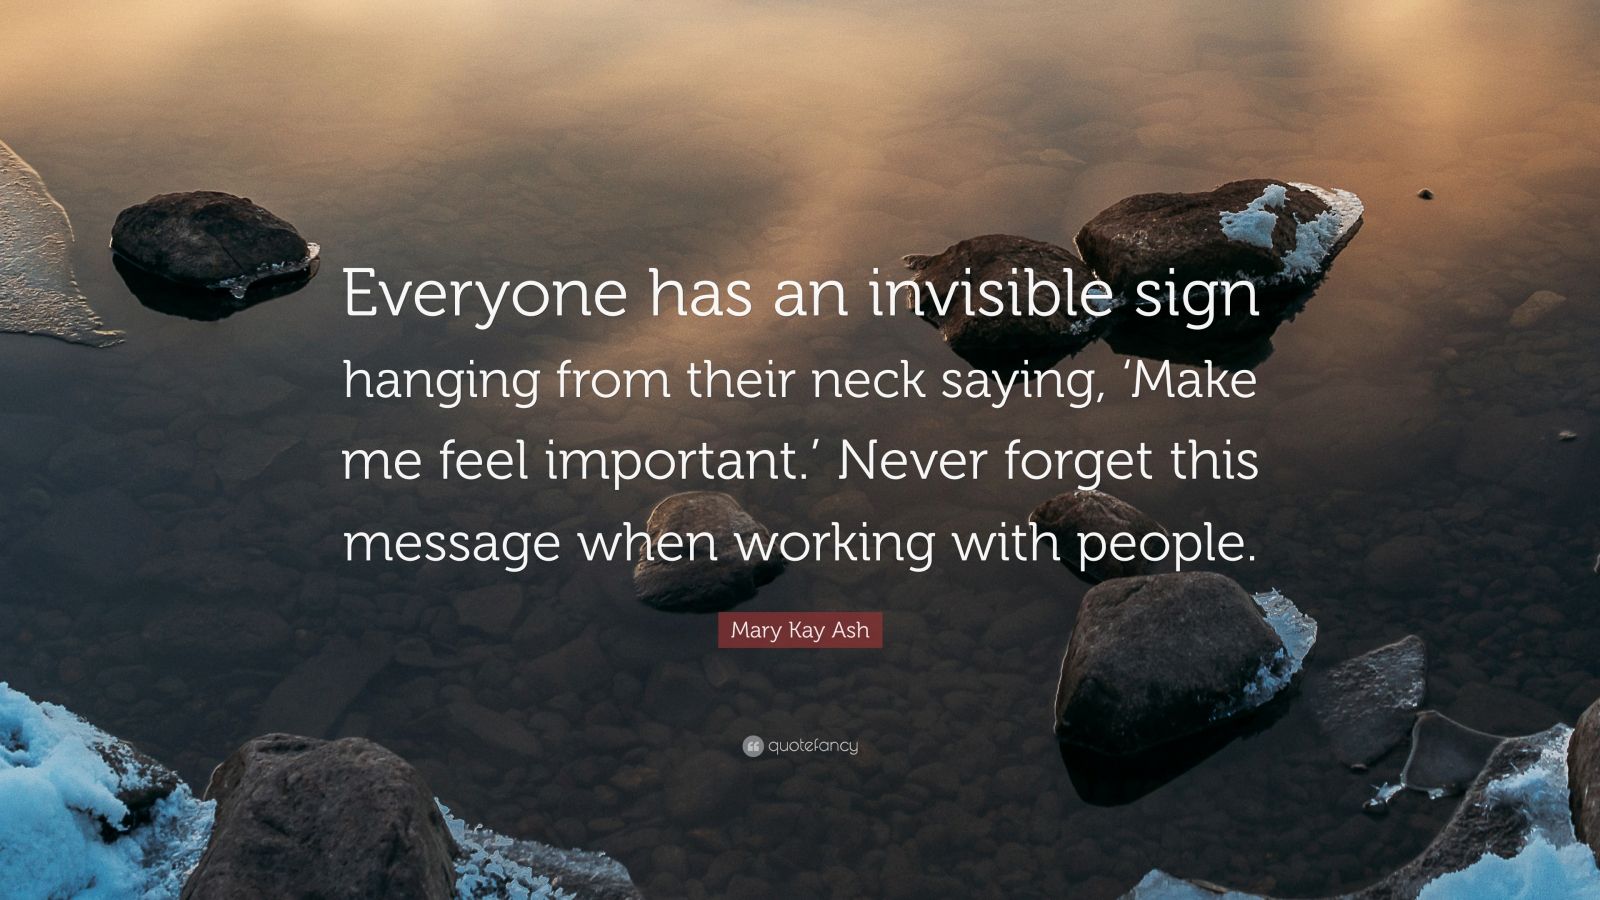 Mary Kay Ash Quote: “Everyone has an invisible sign hanging from their ...